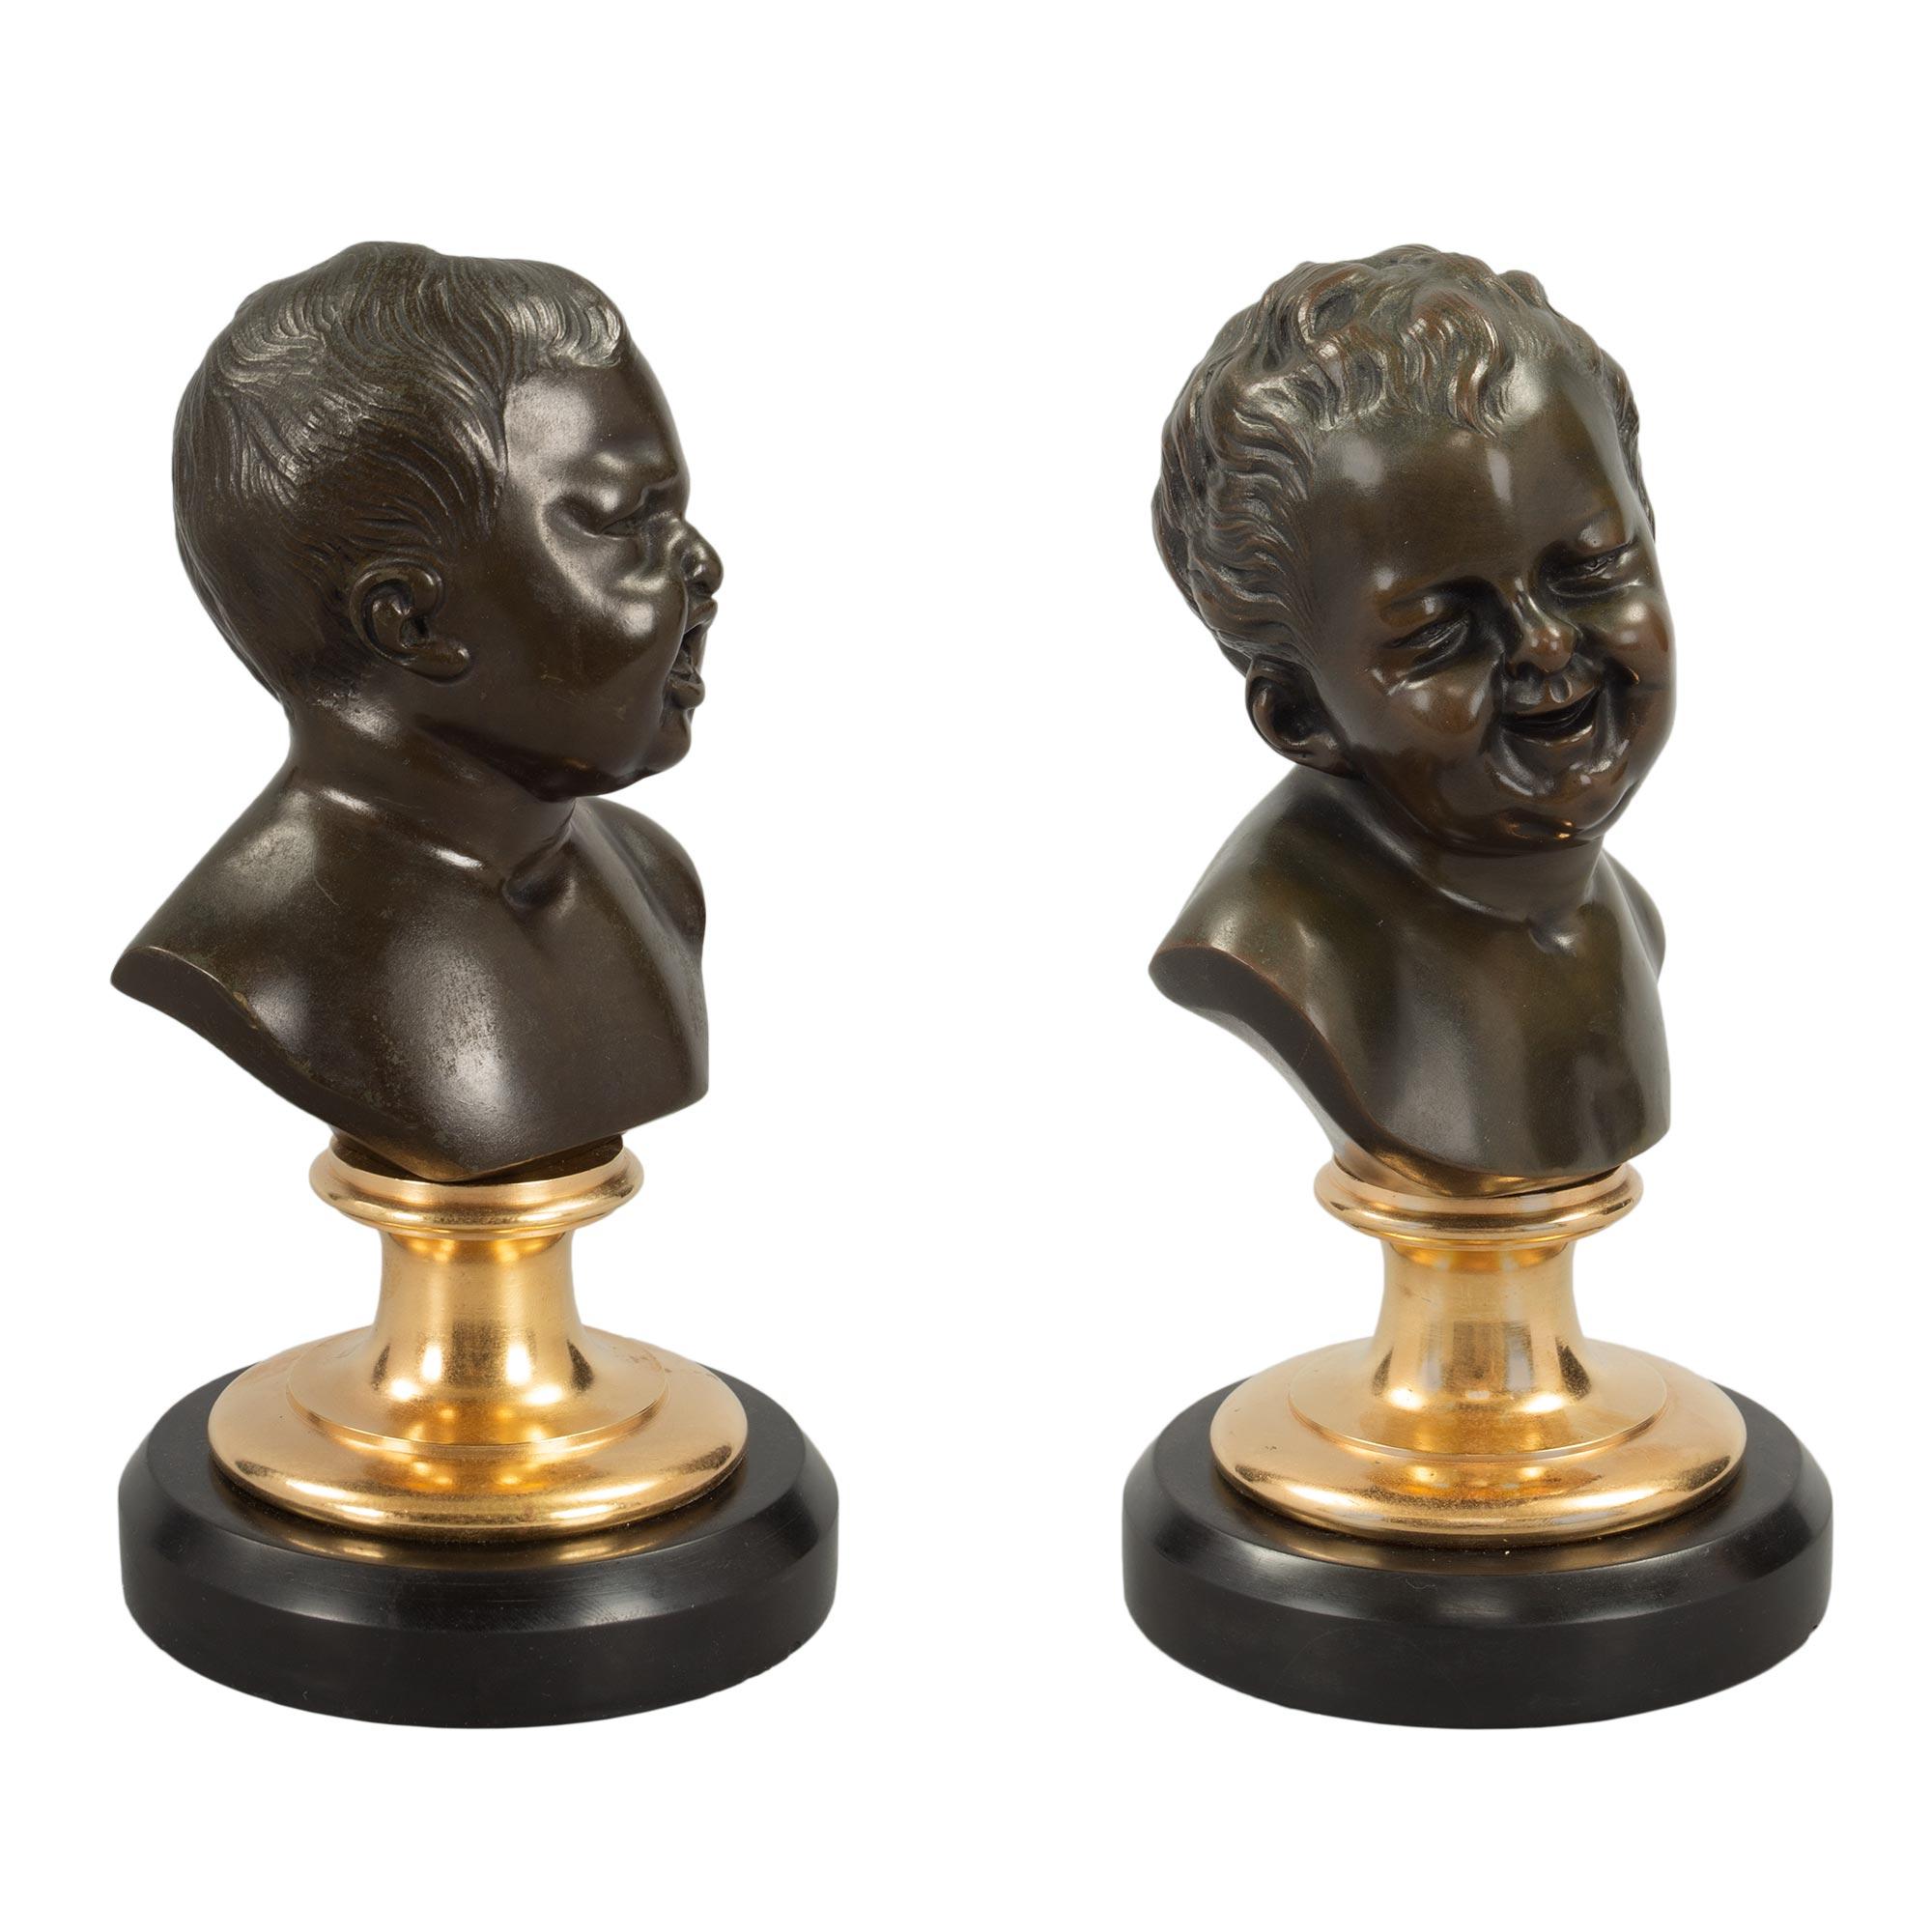 A charming true pair of French 19th century Louis XVI st. black Belgian marble, ormolu and patinated bronze statues of ‘Jean qui rit, Jean qui pleure’, Jean who laughs, Jean who cries. Each bronze is raised by a circular Black Belgian marble base